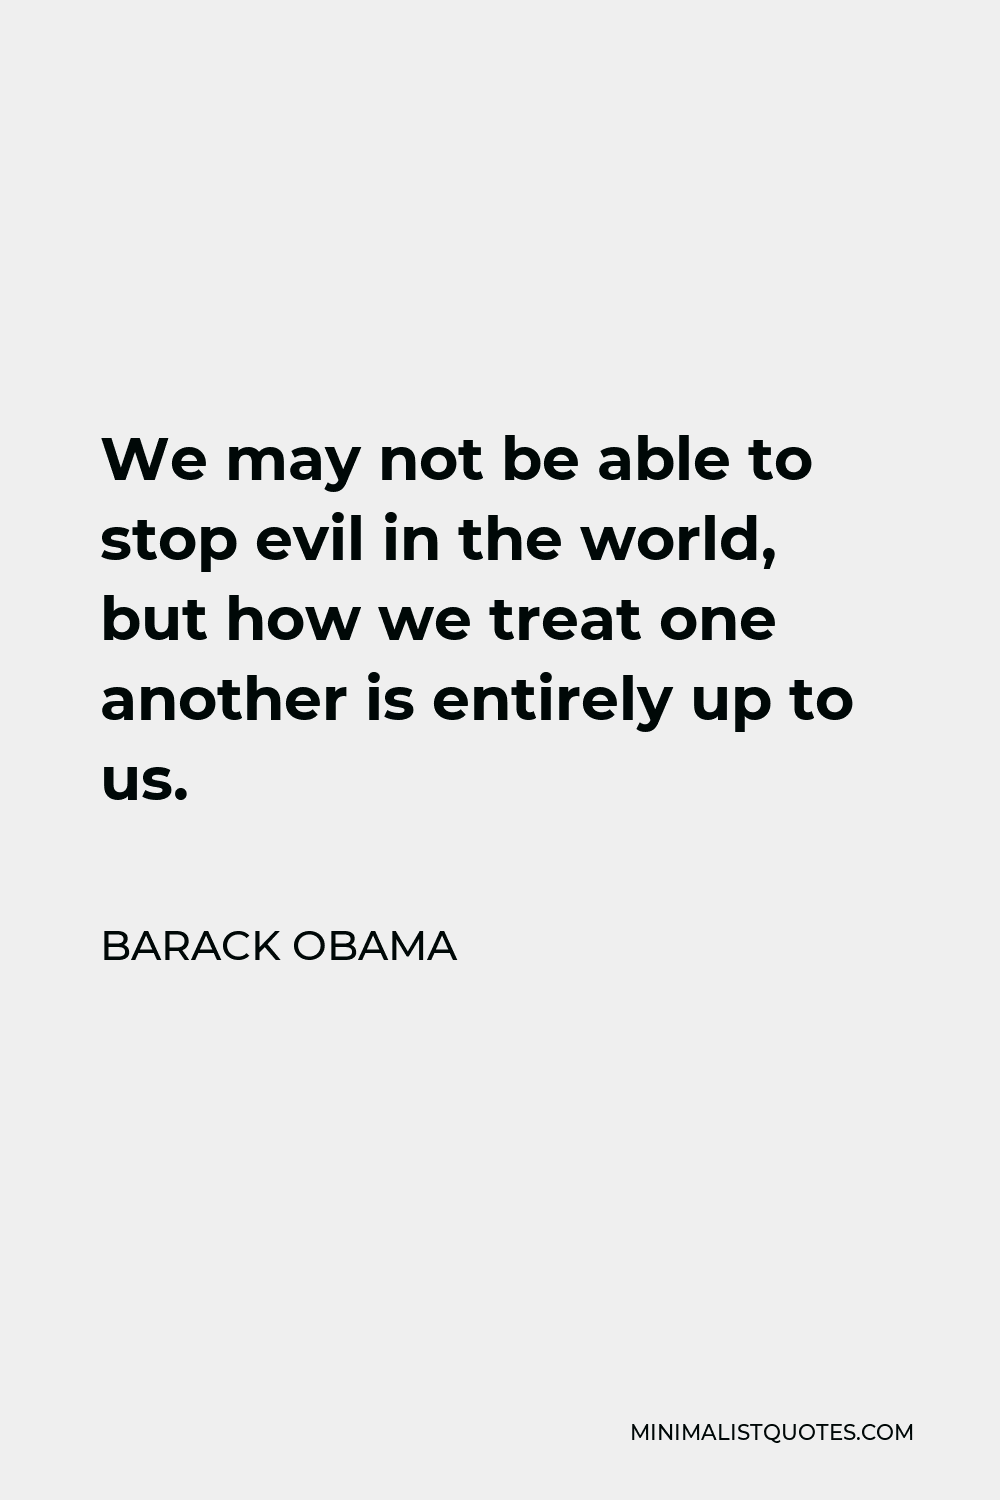 Barack Obama Quote - We may not be able to stop evil in the world, but how we treat one another is entirely up to us.